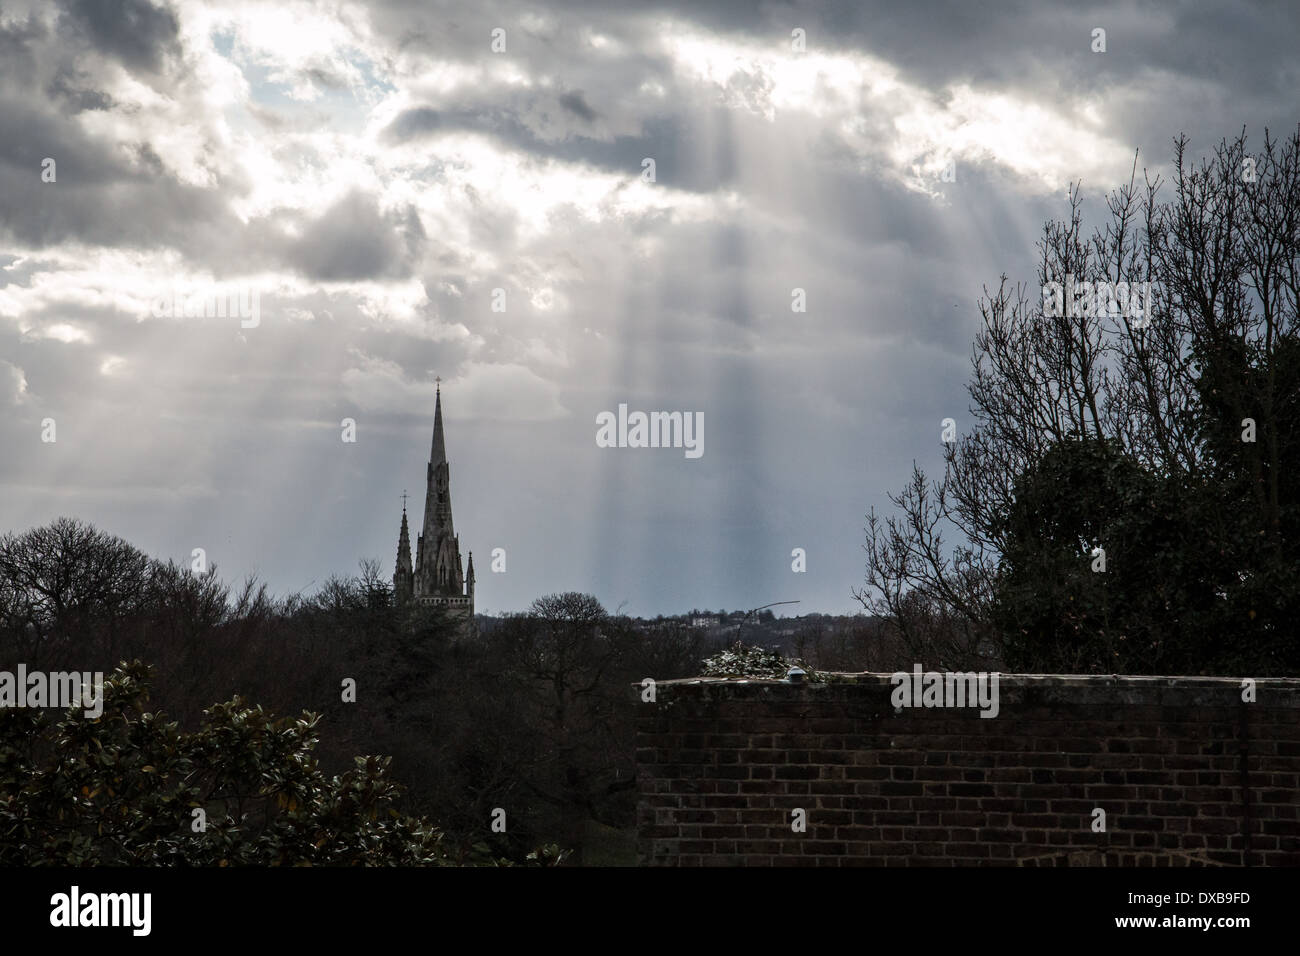 Steeple with cloudy sky and rays of light Stock Photo